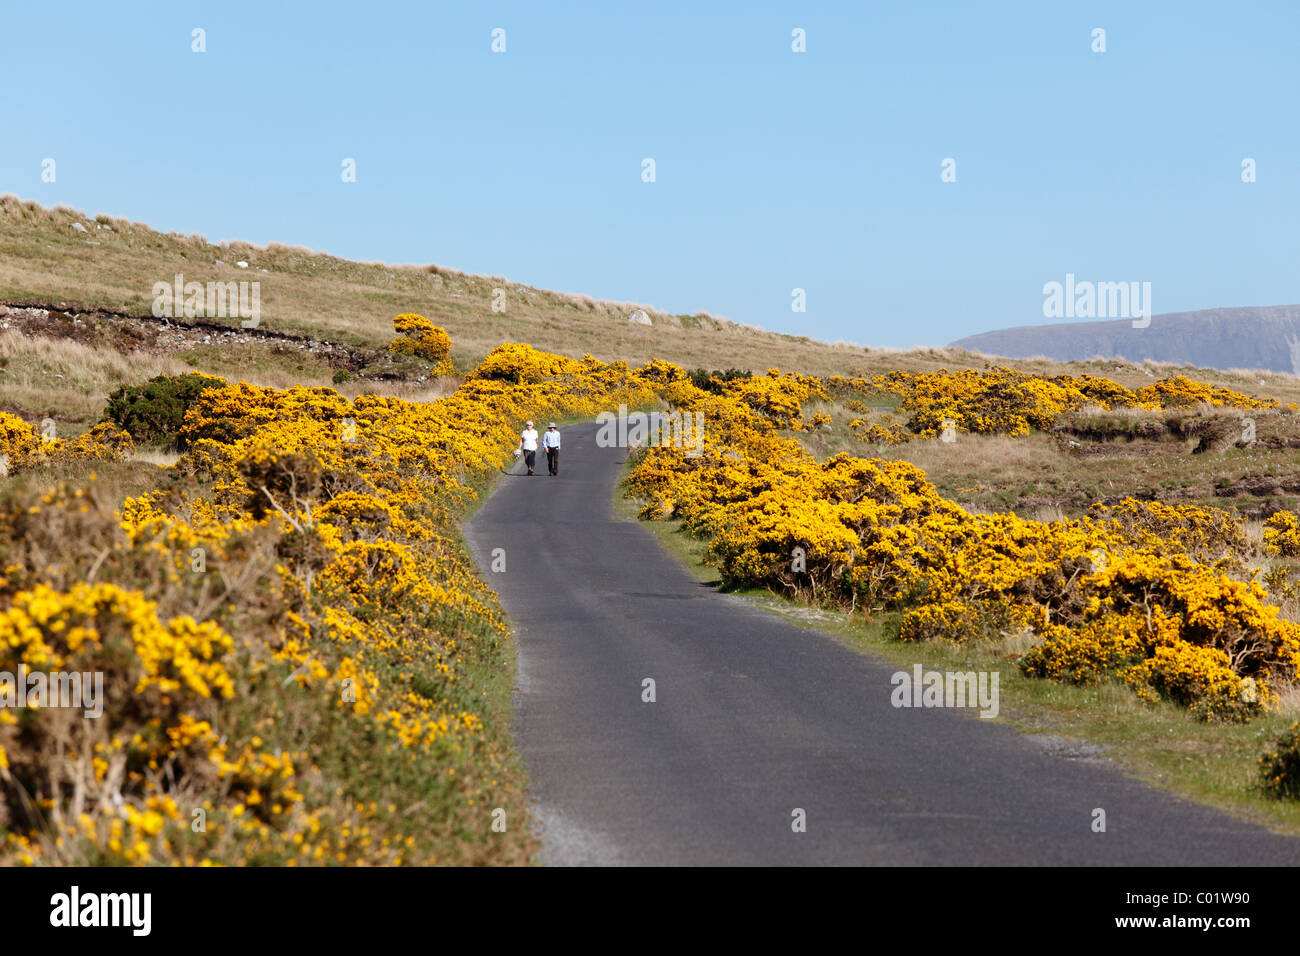 Country road and flowering gorse near Dooega, Achill Island, County Mayo, Connacht province, Republic of Ireland, Europe Stock Photo